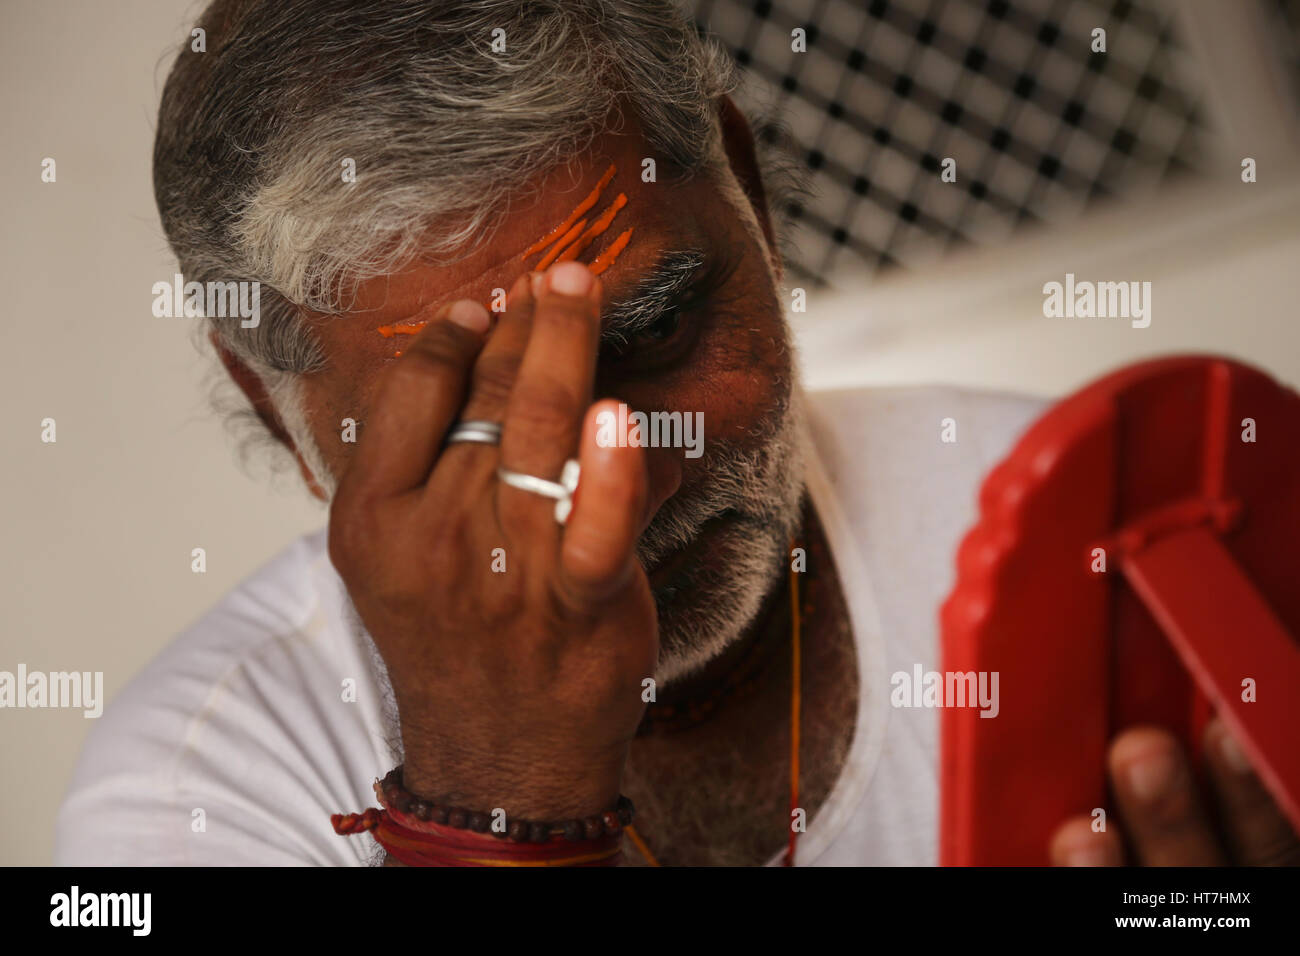 a Brahmin will decorates his head in celebration Stock Photo